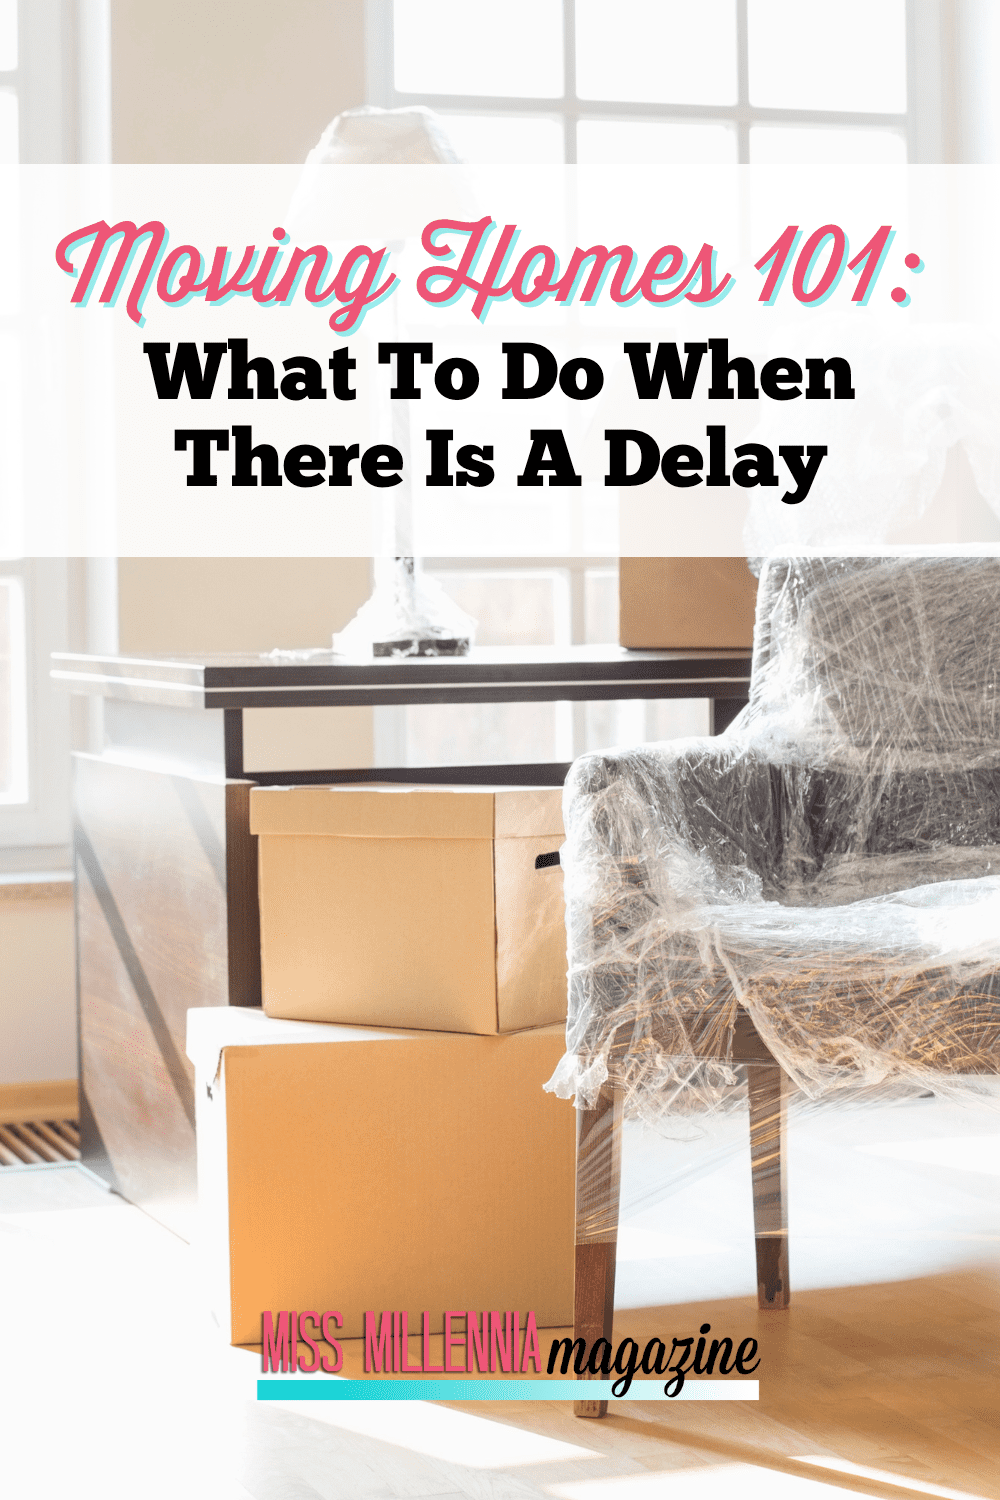 Moving Homes 101: What To Do When There Is A Delay